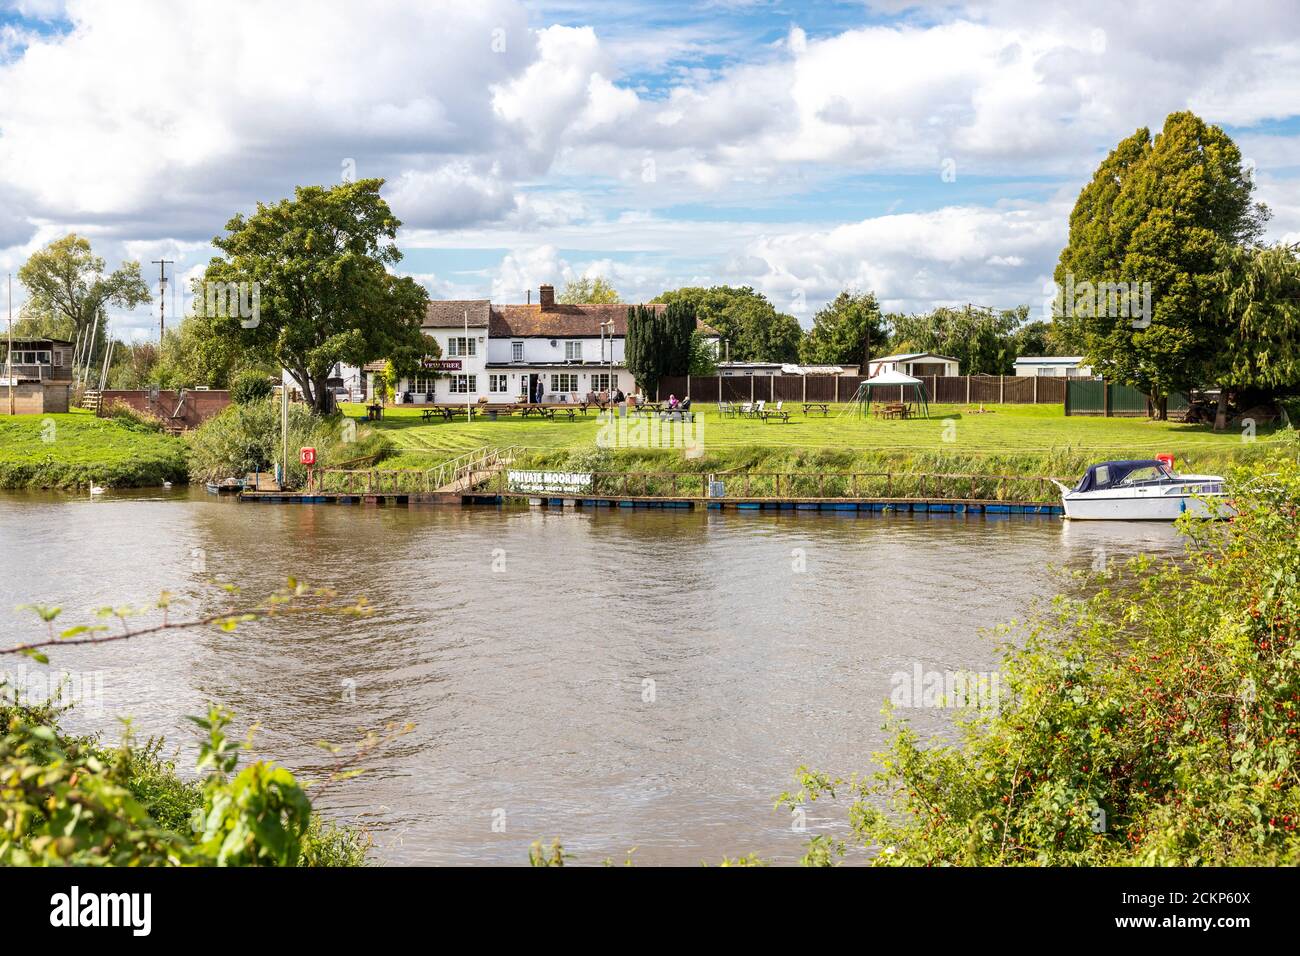 The Yew Tree Inn (Old Ferry Inn) sulle rive del fiume Severn a Chaceley, Gloucestershire Regno Unito Foto Stock